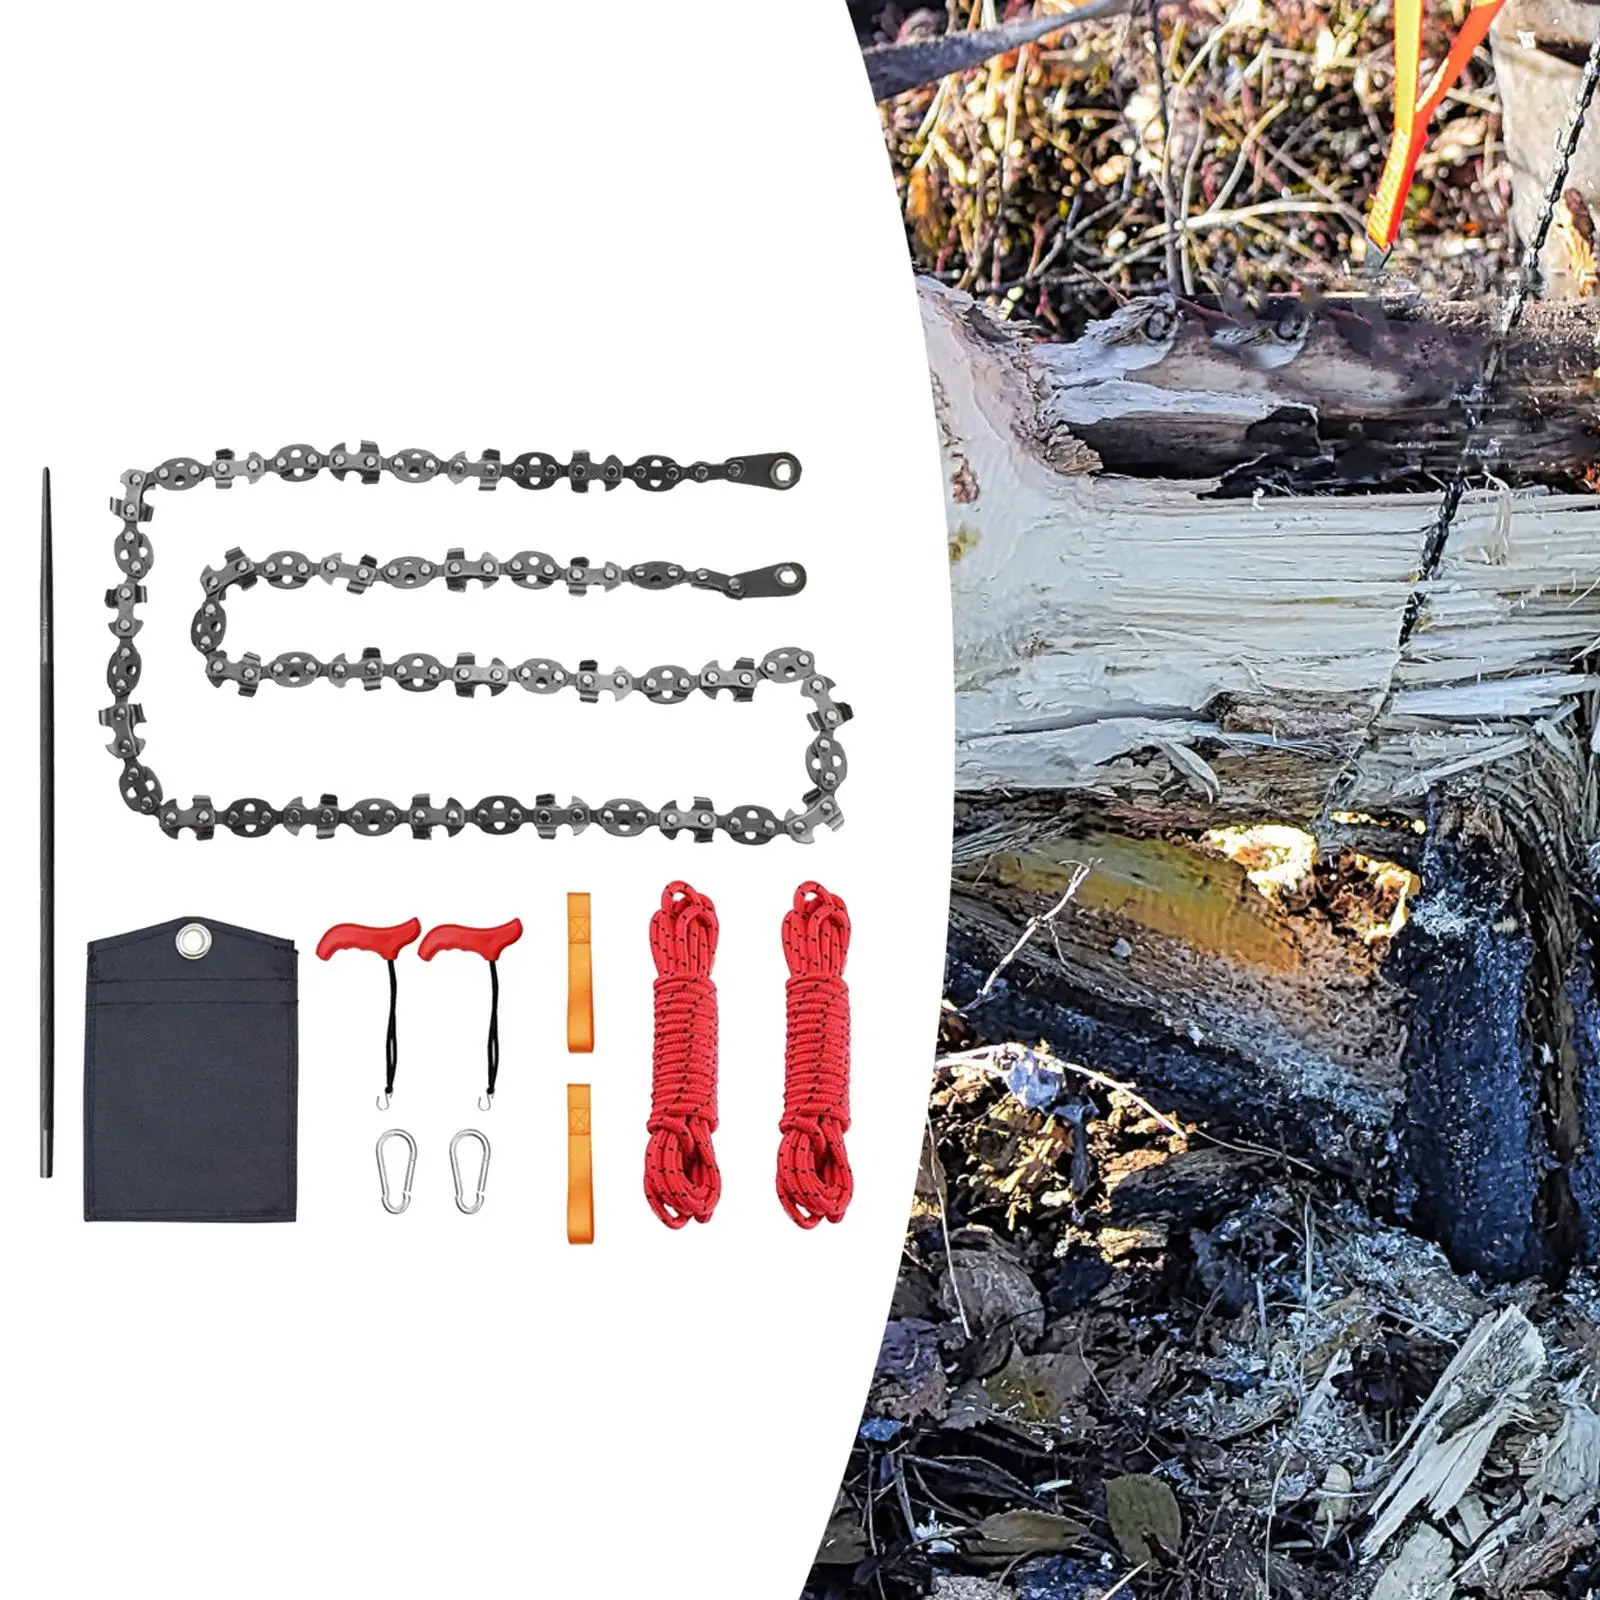 Pocket Saw Survival Gear Heavy Duty Hand Rope Chain Saw Wood Cutting for Backpacking Outdoor Fishermen Emergency Gardening